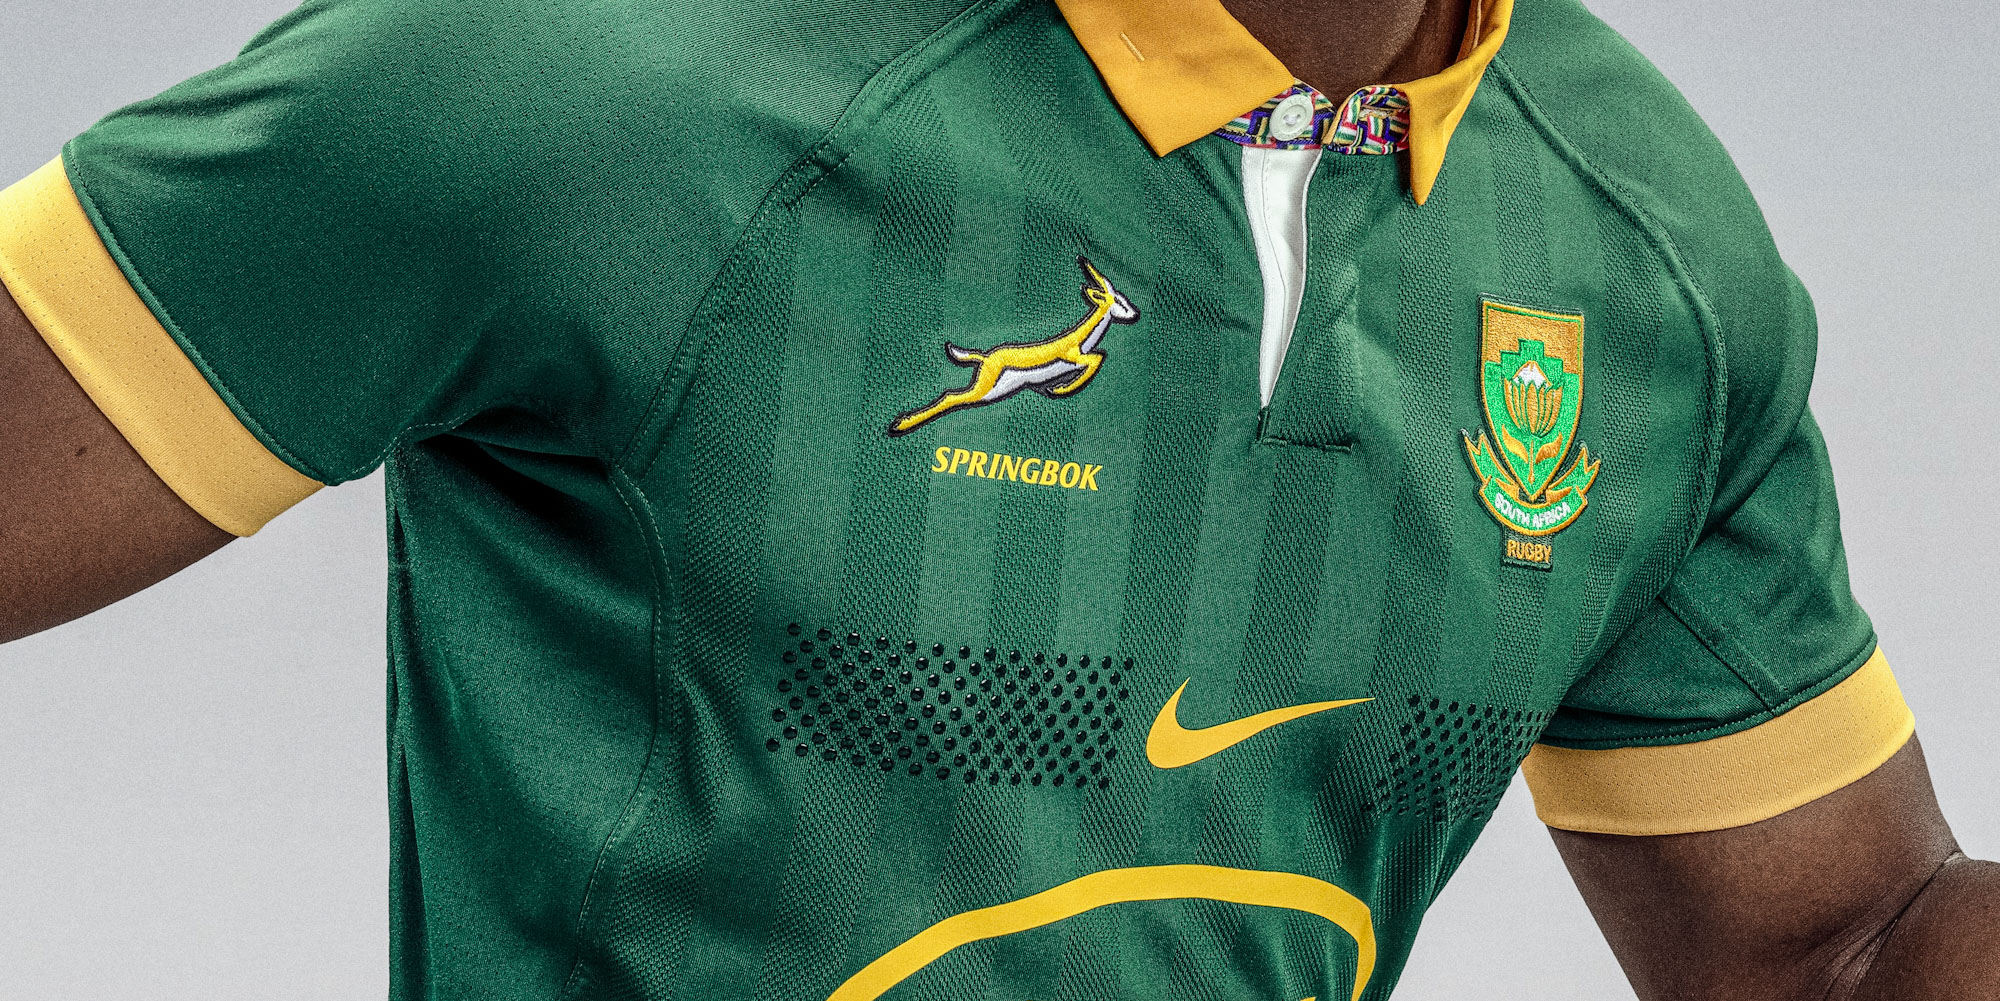 New Nike Springbok playing jersey revealed SA Rugby